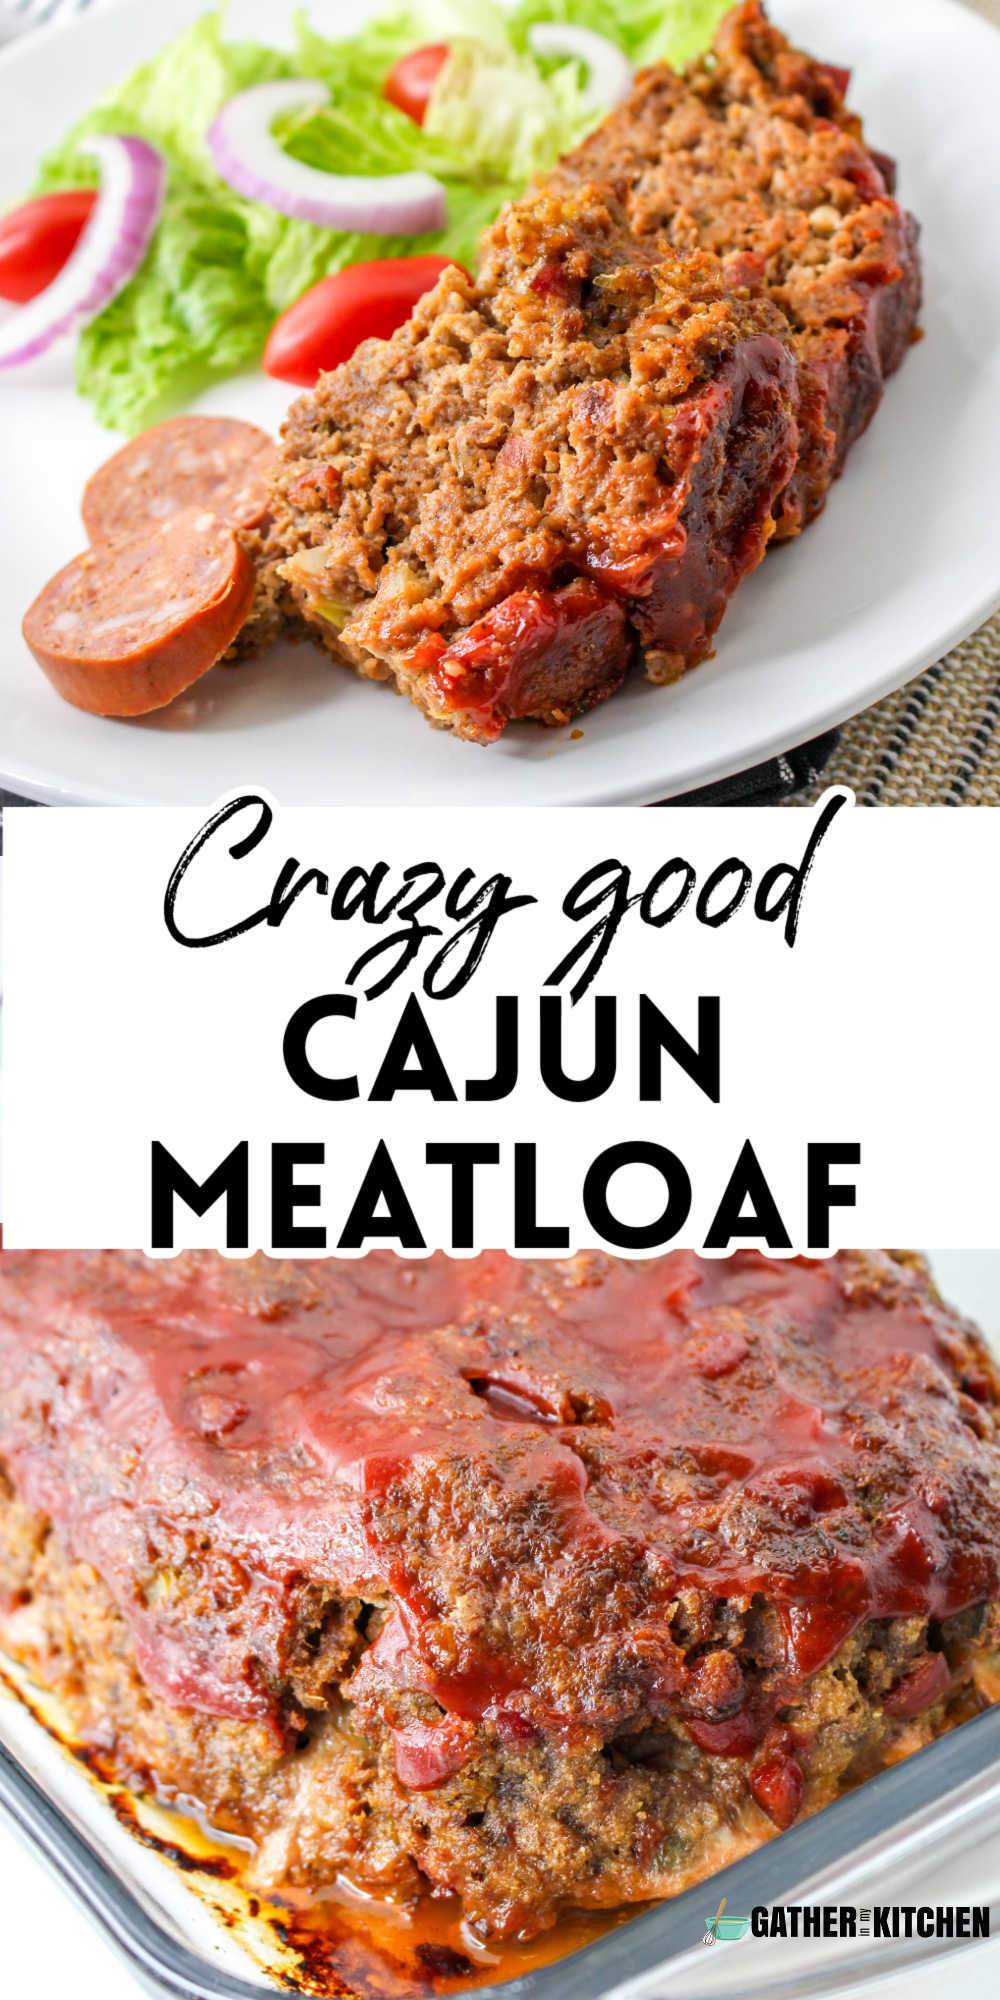 pin image: top is a slice of cajun meatloaf on a plate, the middle says "Crazy good cajun meatloaf" and bottom is a whole tray of cajun meatloaf